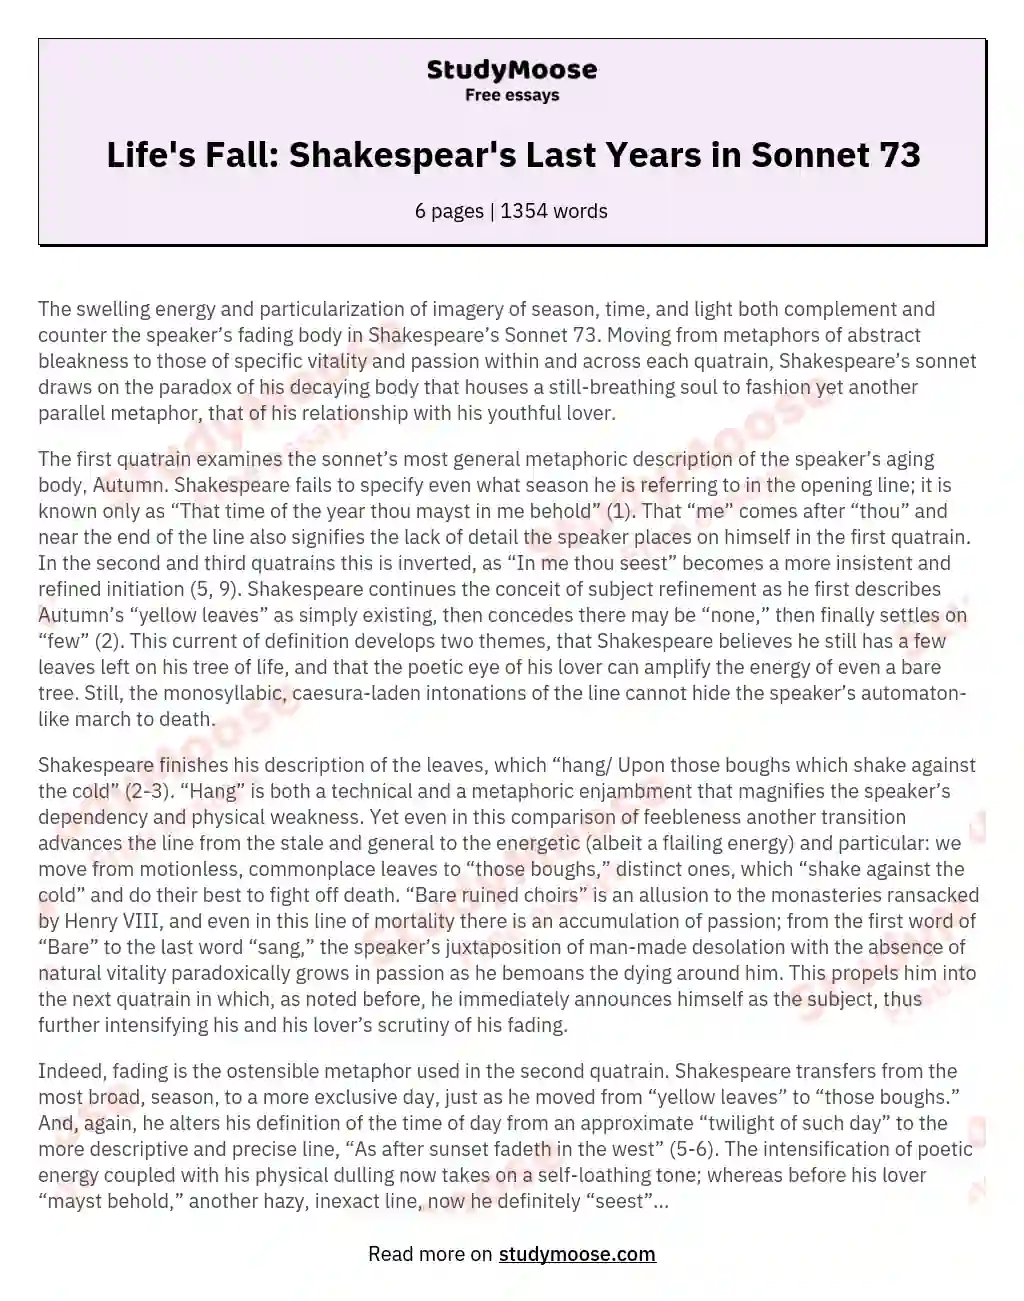 Life's Fall: Shakespear's Last Years in Sonnet 73 essay